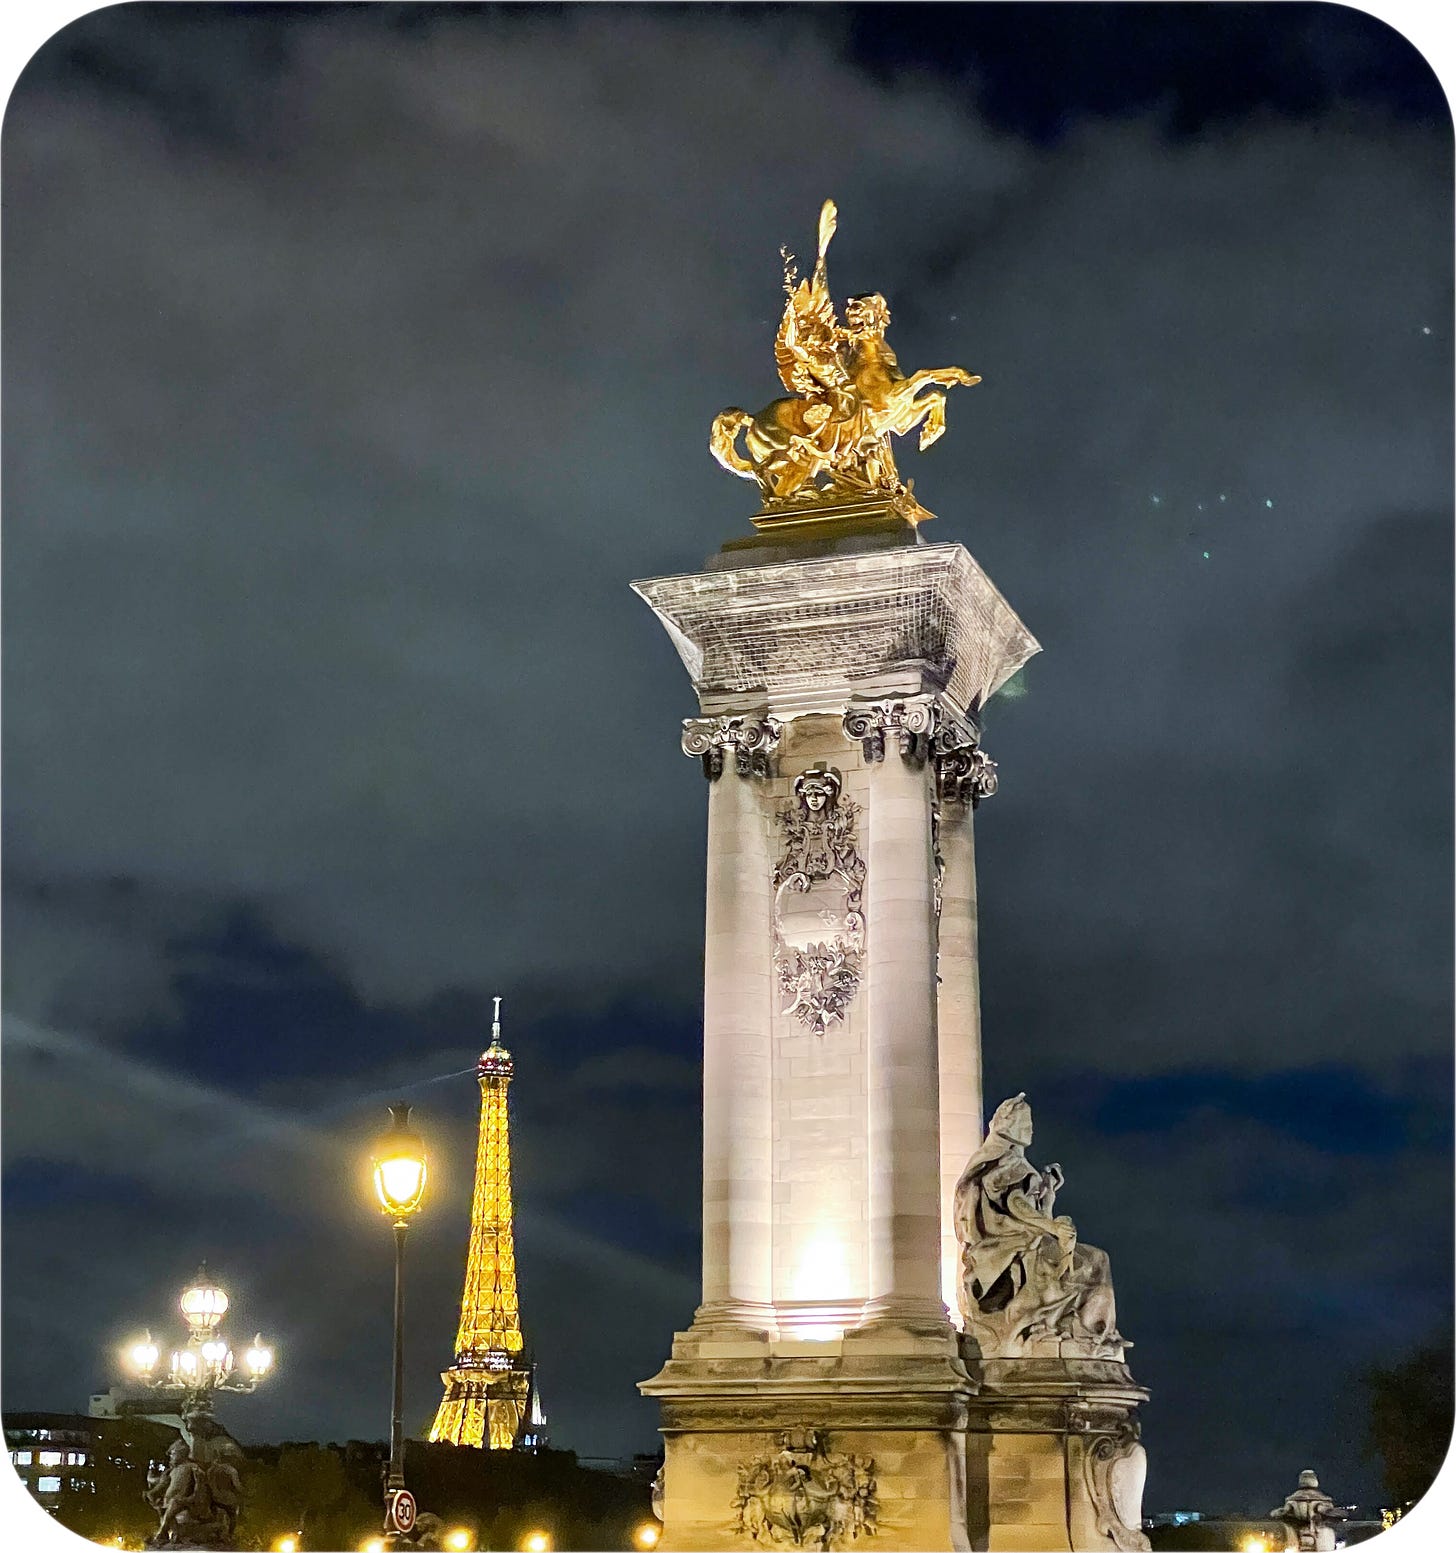 Pont Alexandre III and the Eiffel Tower at night.